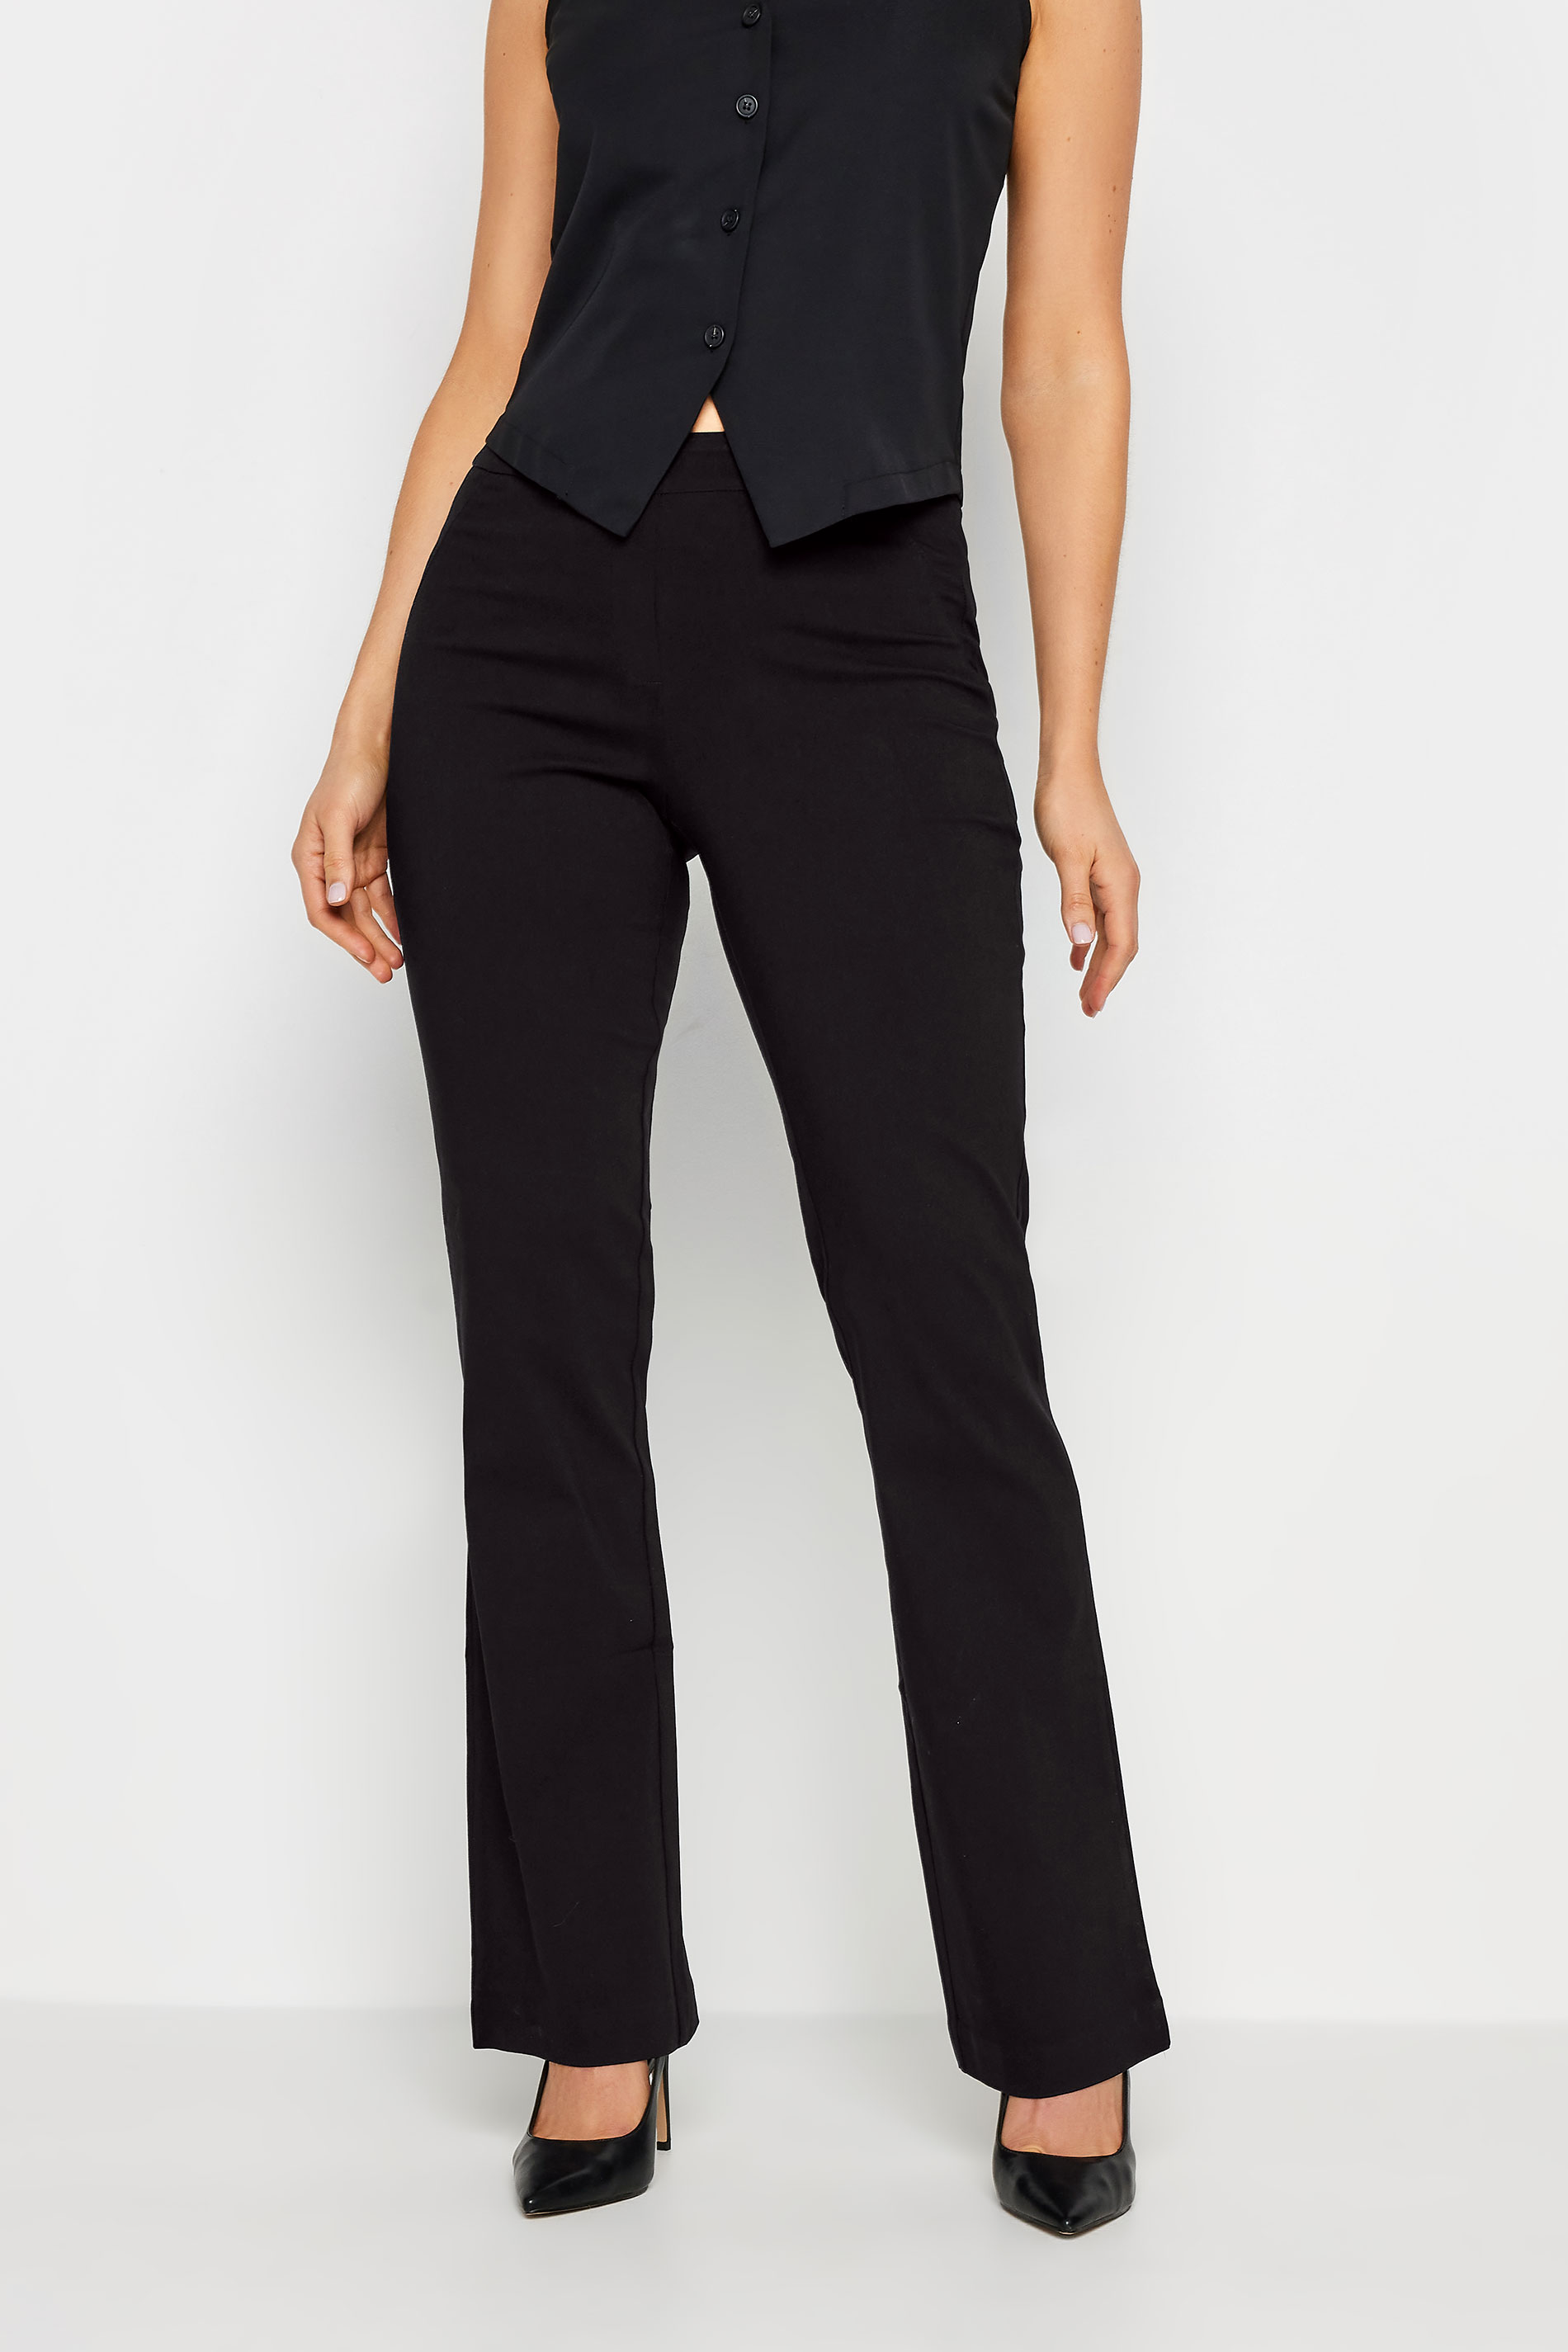 Buy Women's Long Tall Sally Cuff/ Pull On Trousers Online